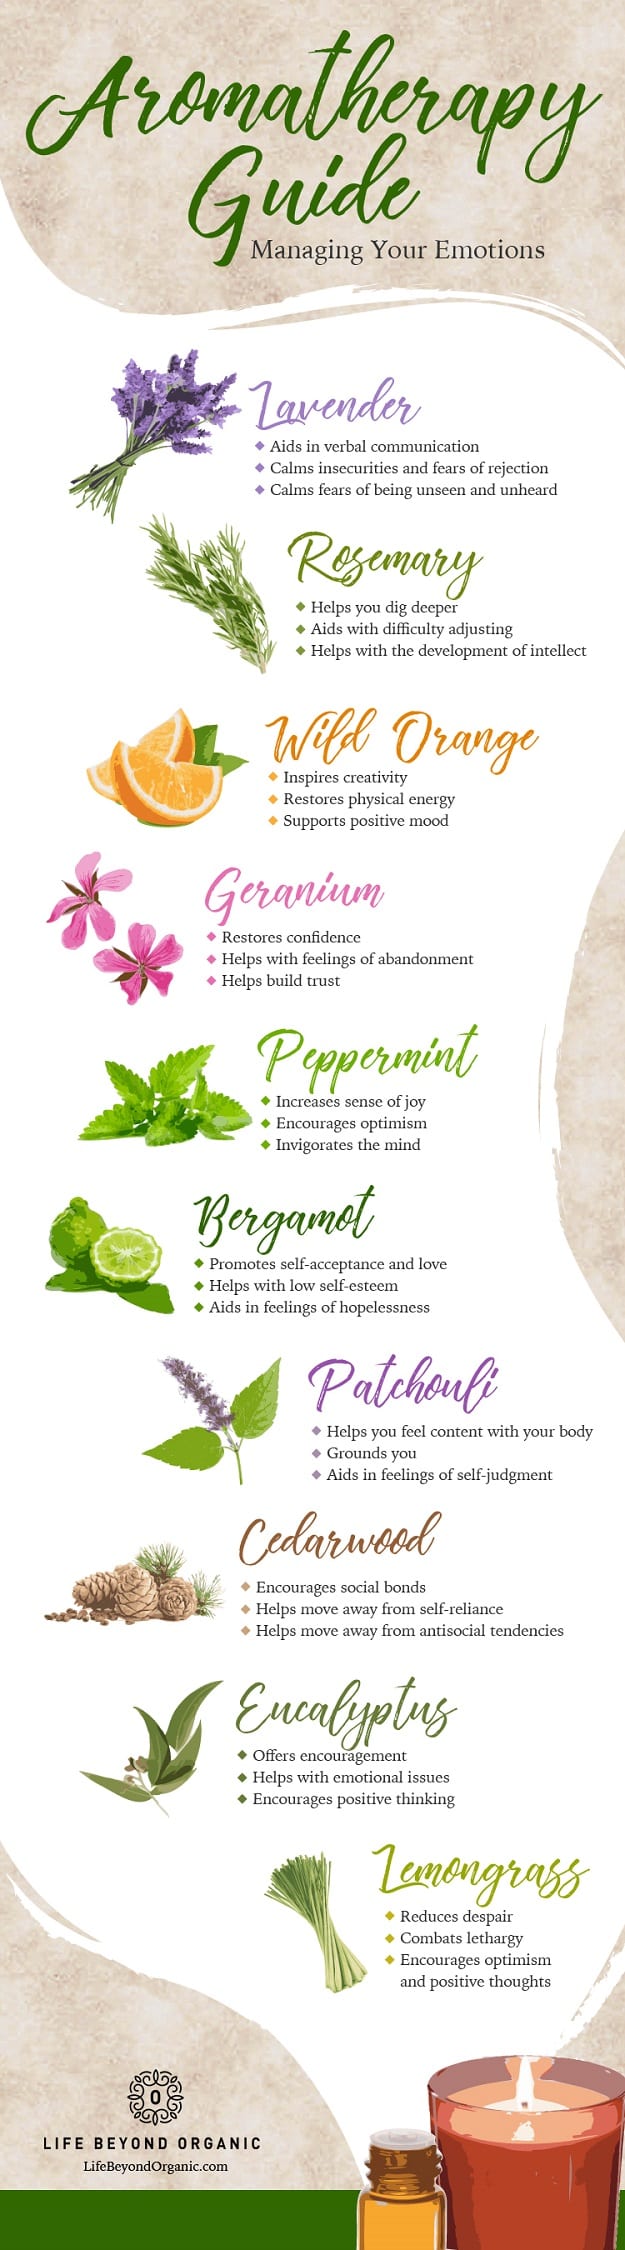 Aromatherapy Guide: Managing Your Emotions